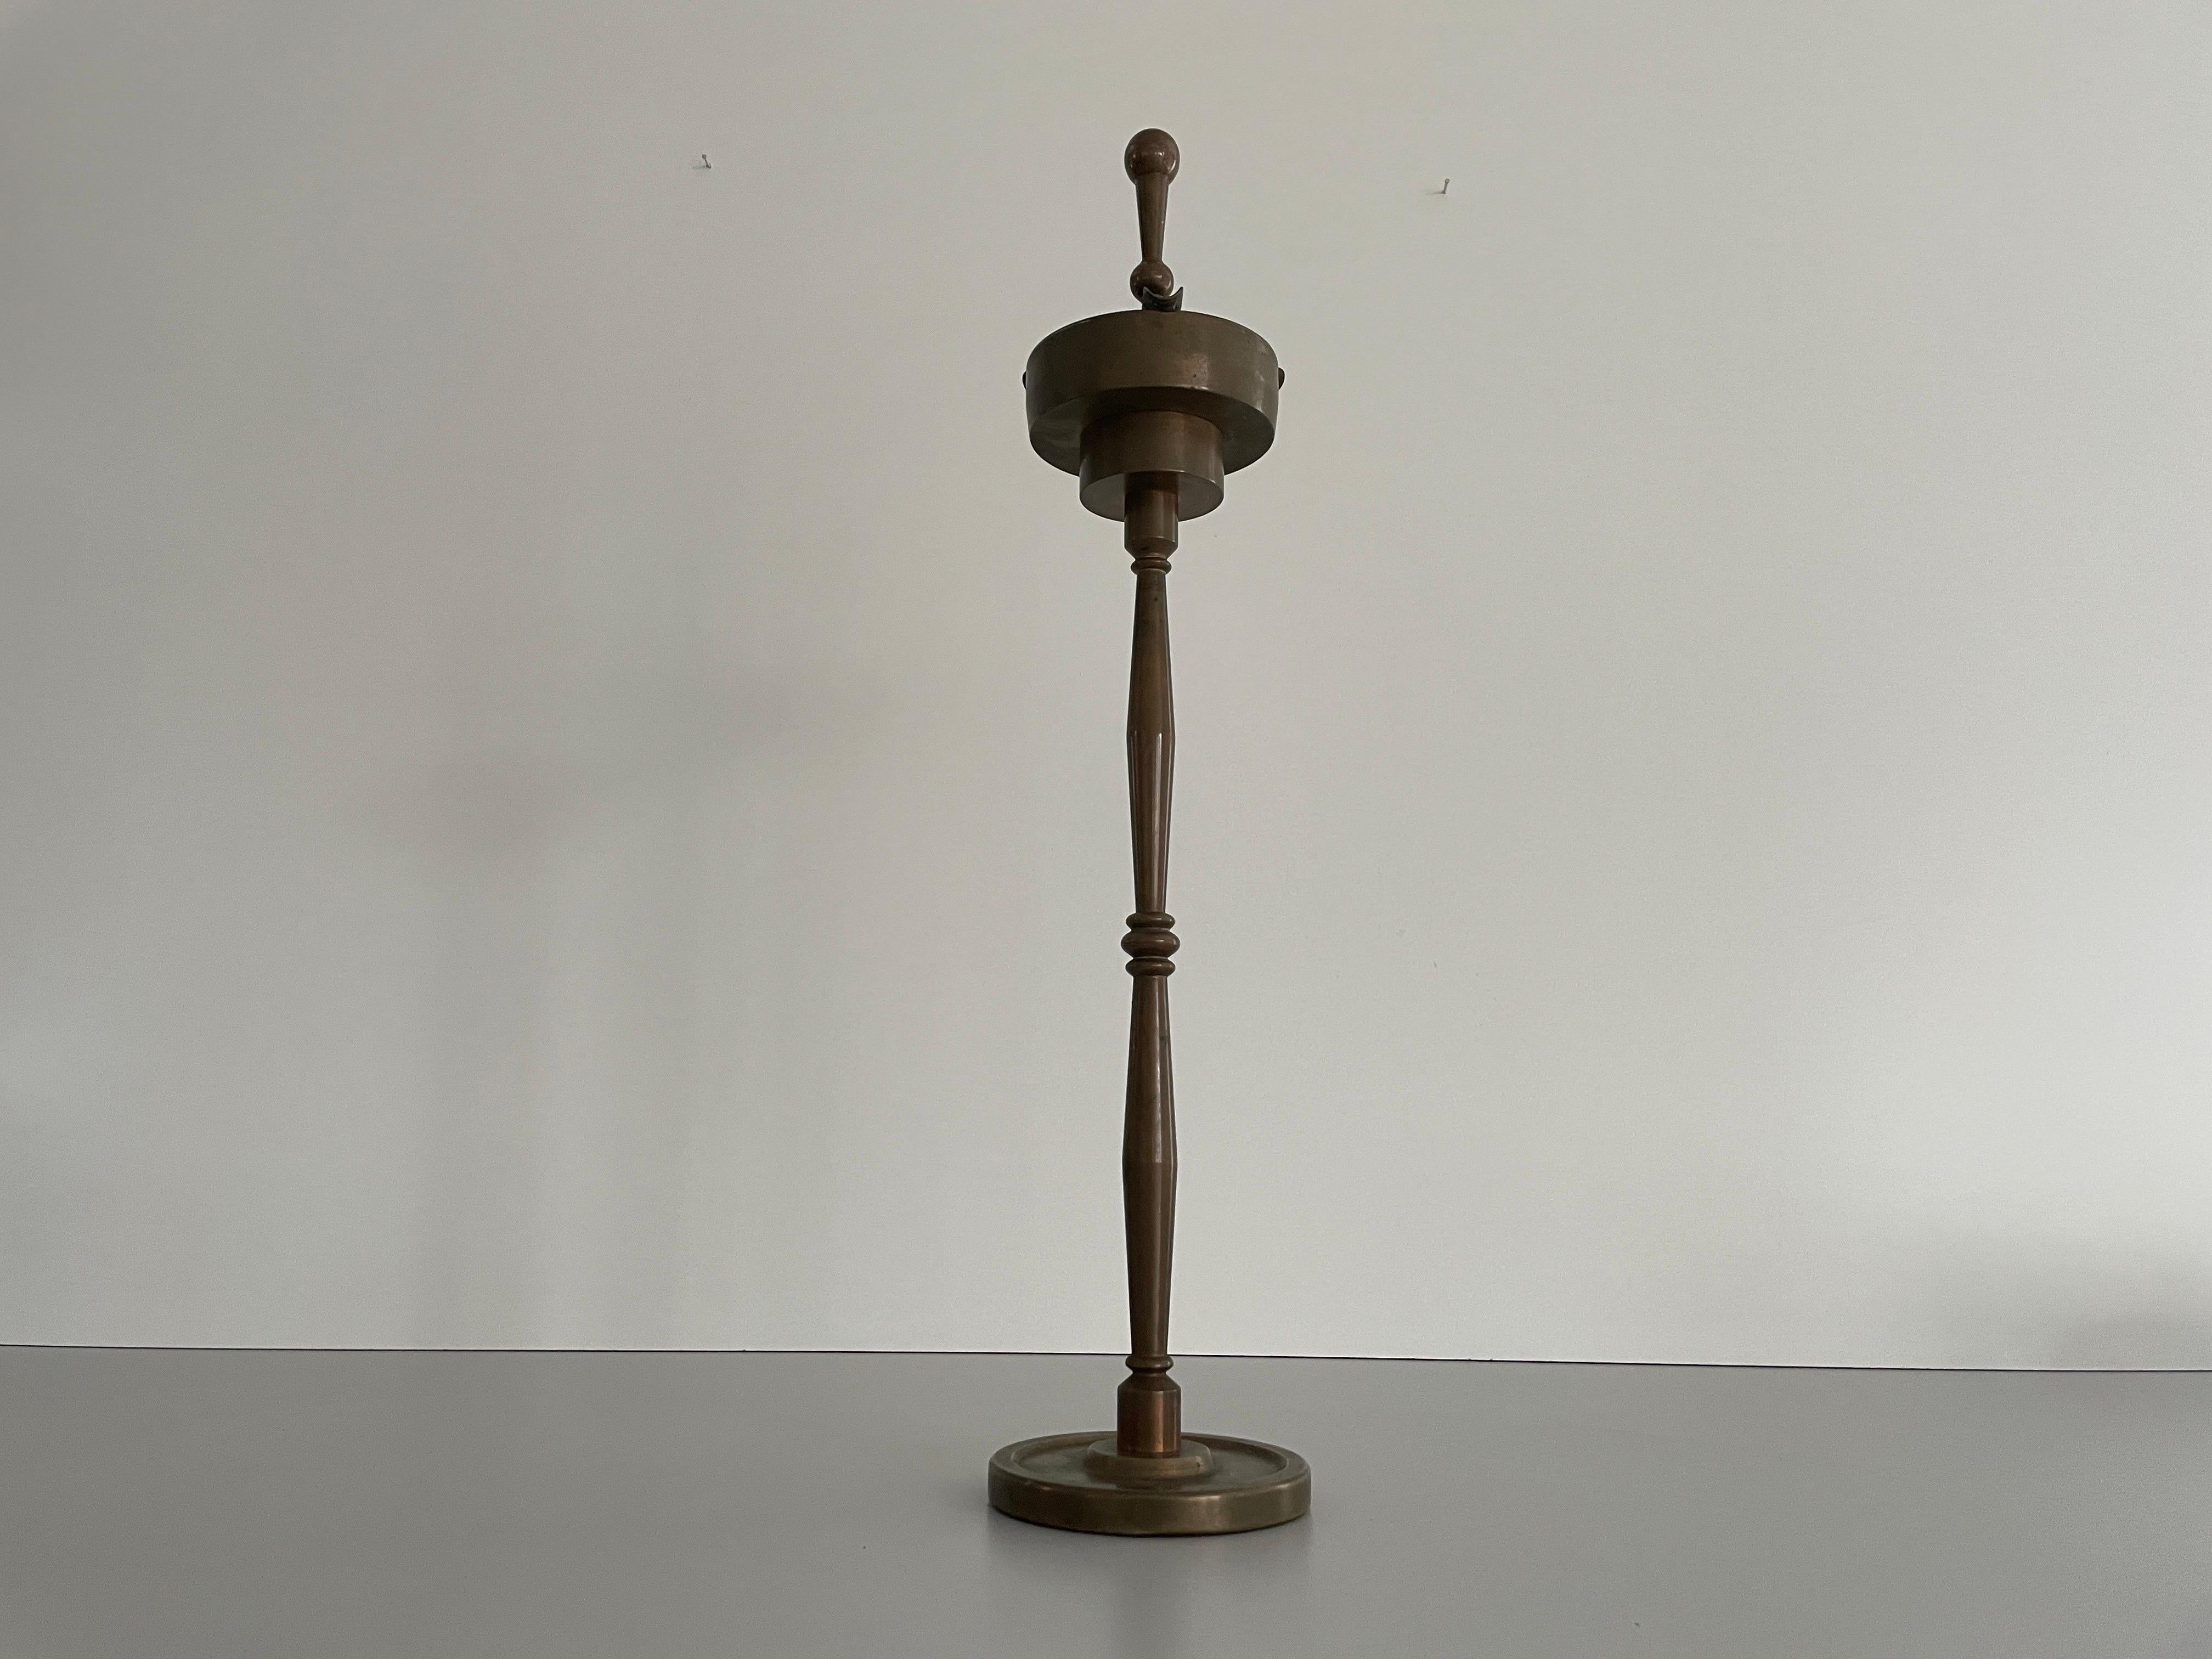 Full Brass Heavy Industrial Floor Ashtray, 1950s, Italy

Measuretements :

Height: 58cm
Ashtray diameter: 12 cm
Base: 12 cm

Weight: 3.7 kg

Please do not hesitate to ask us if you have any questions.